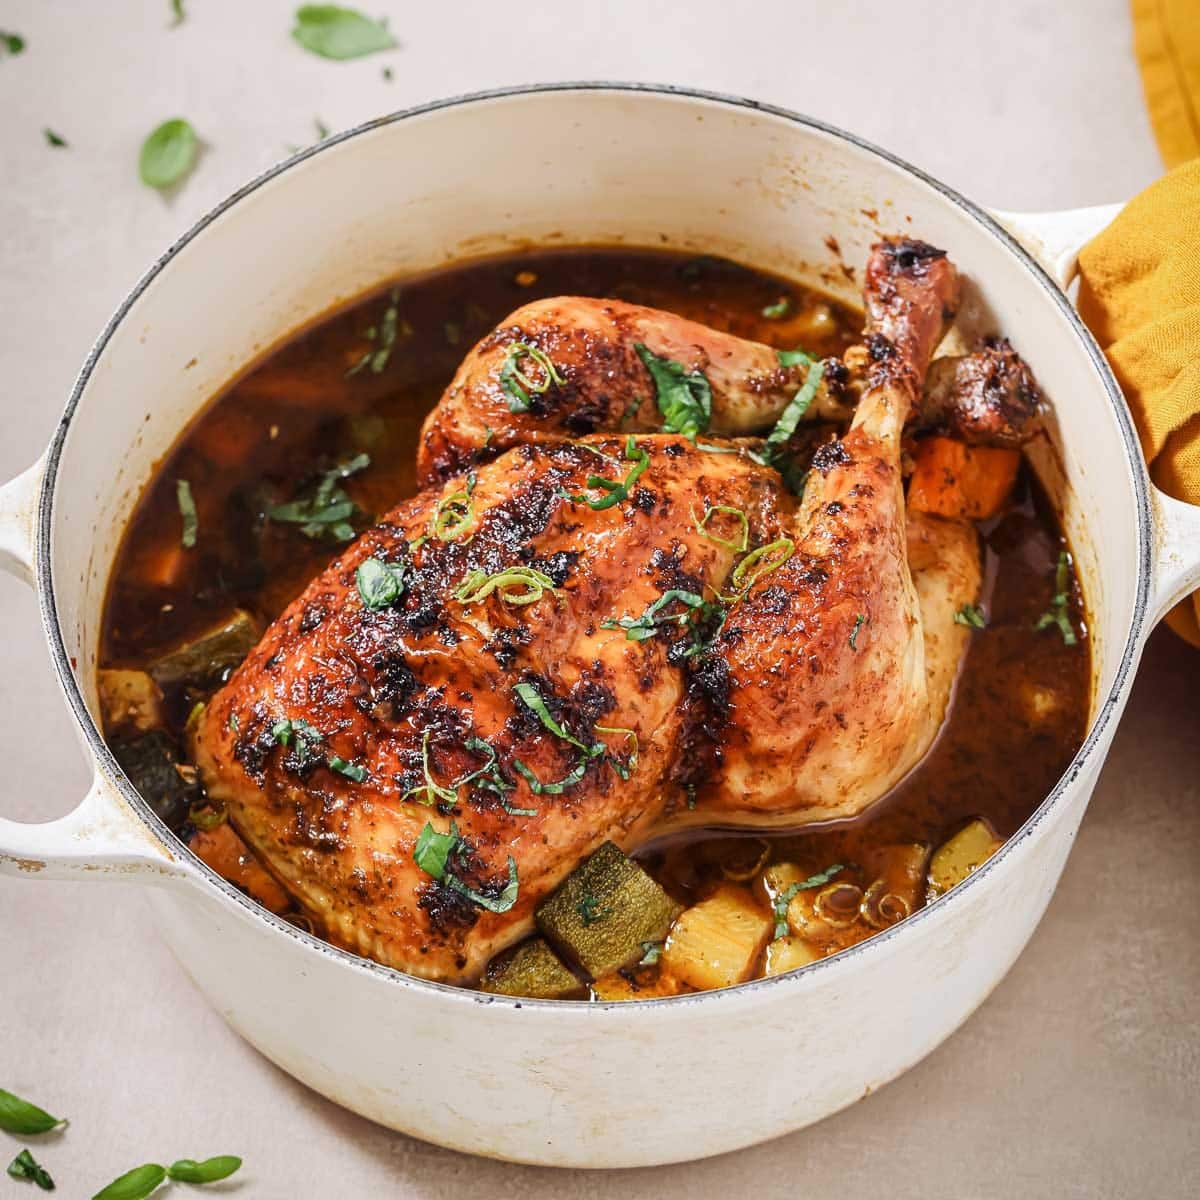 https://iheartumami.com/wp-content/uploads/2017/12/Dutch-Oven-Whole-Curry-Chicken-Recipe.jpg